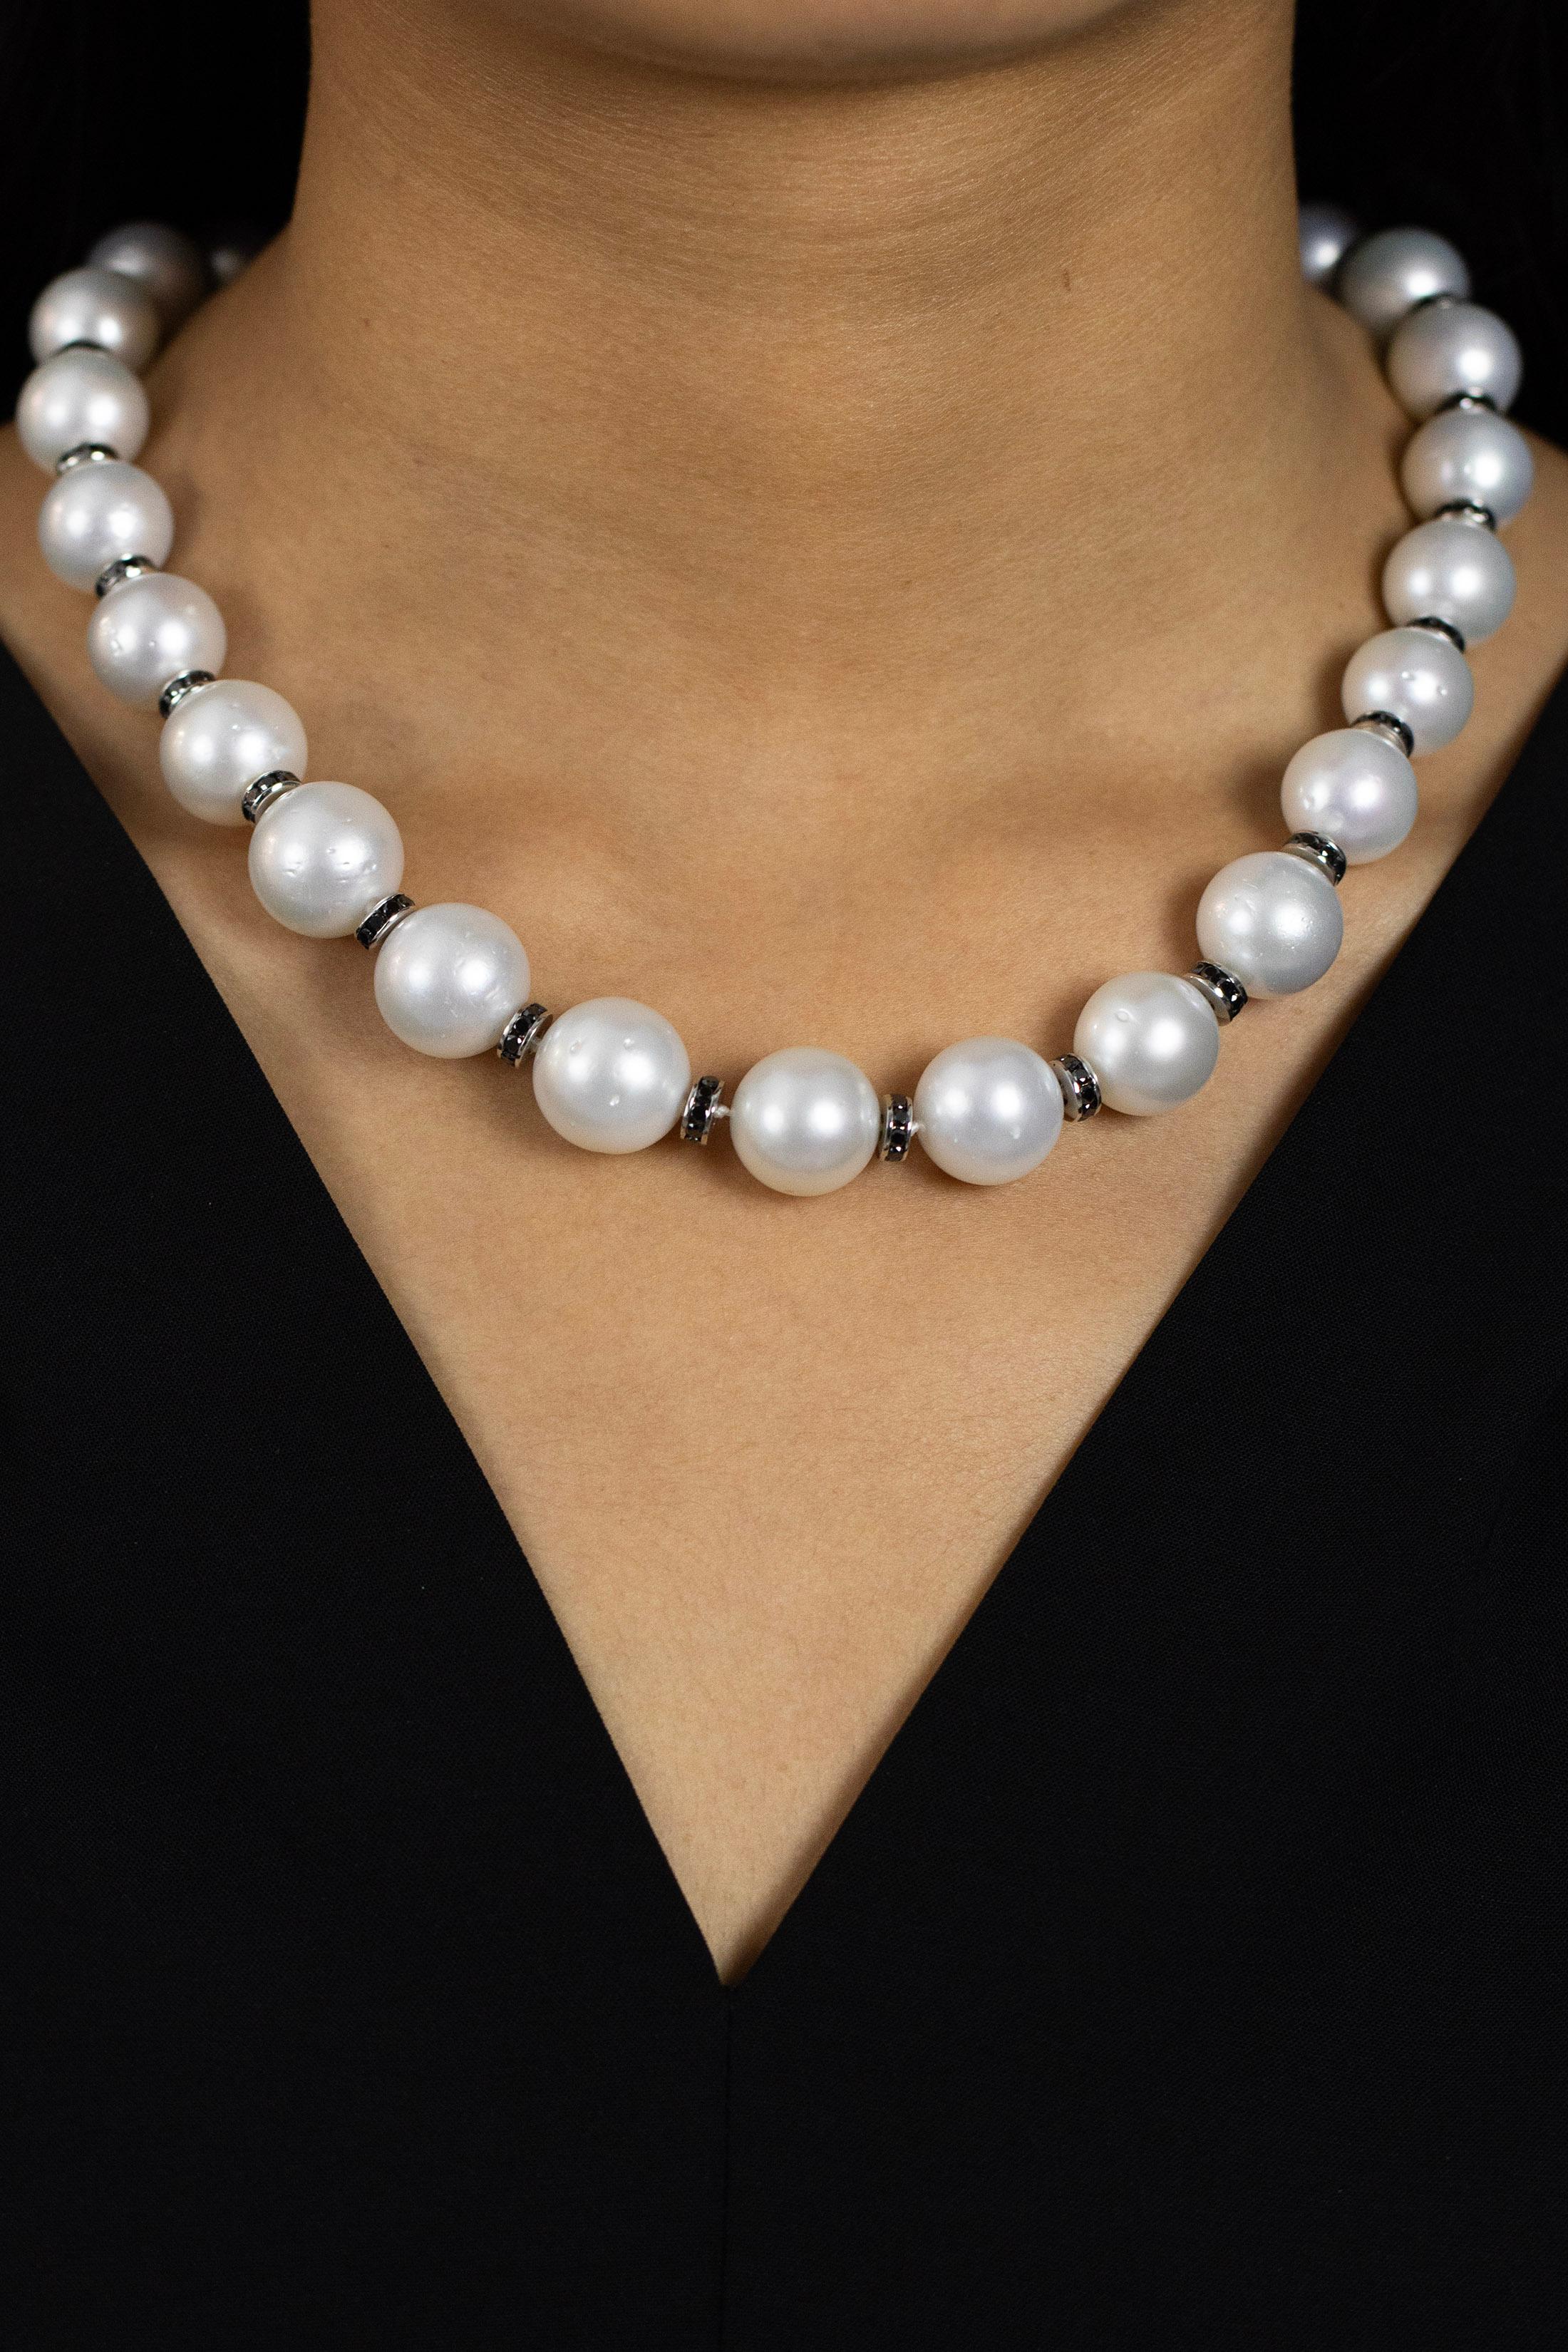 Contemporary Roman Malakov 11.02 Carats Black Diamonds with Natural White Pearls Necklace For Sale